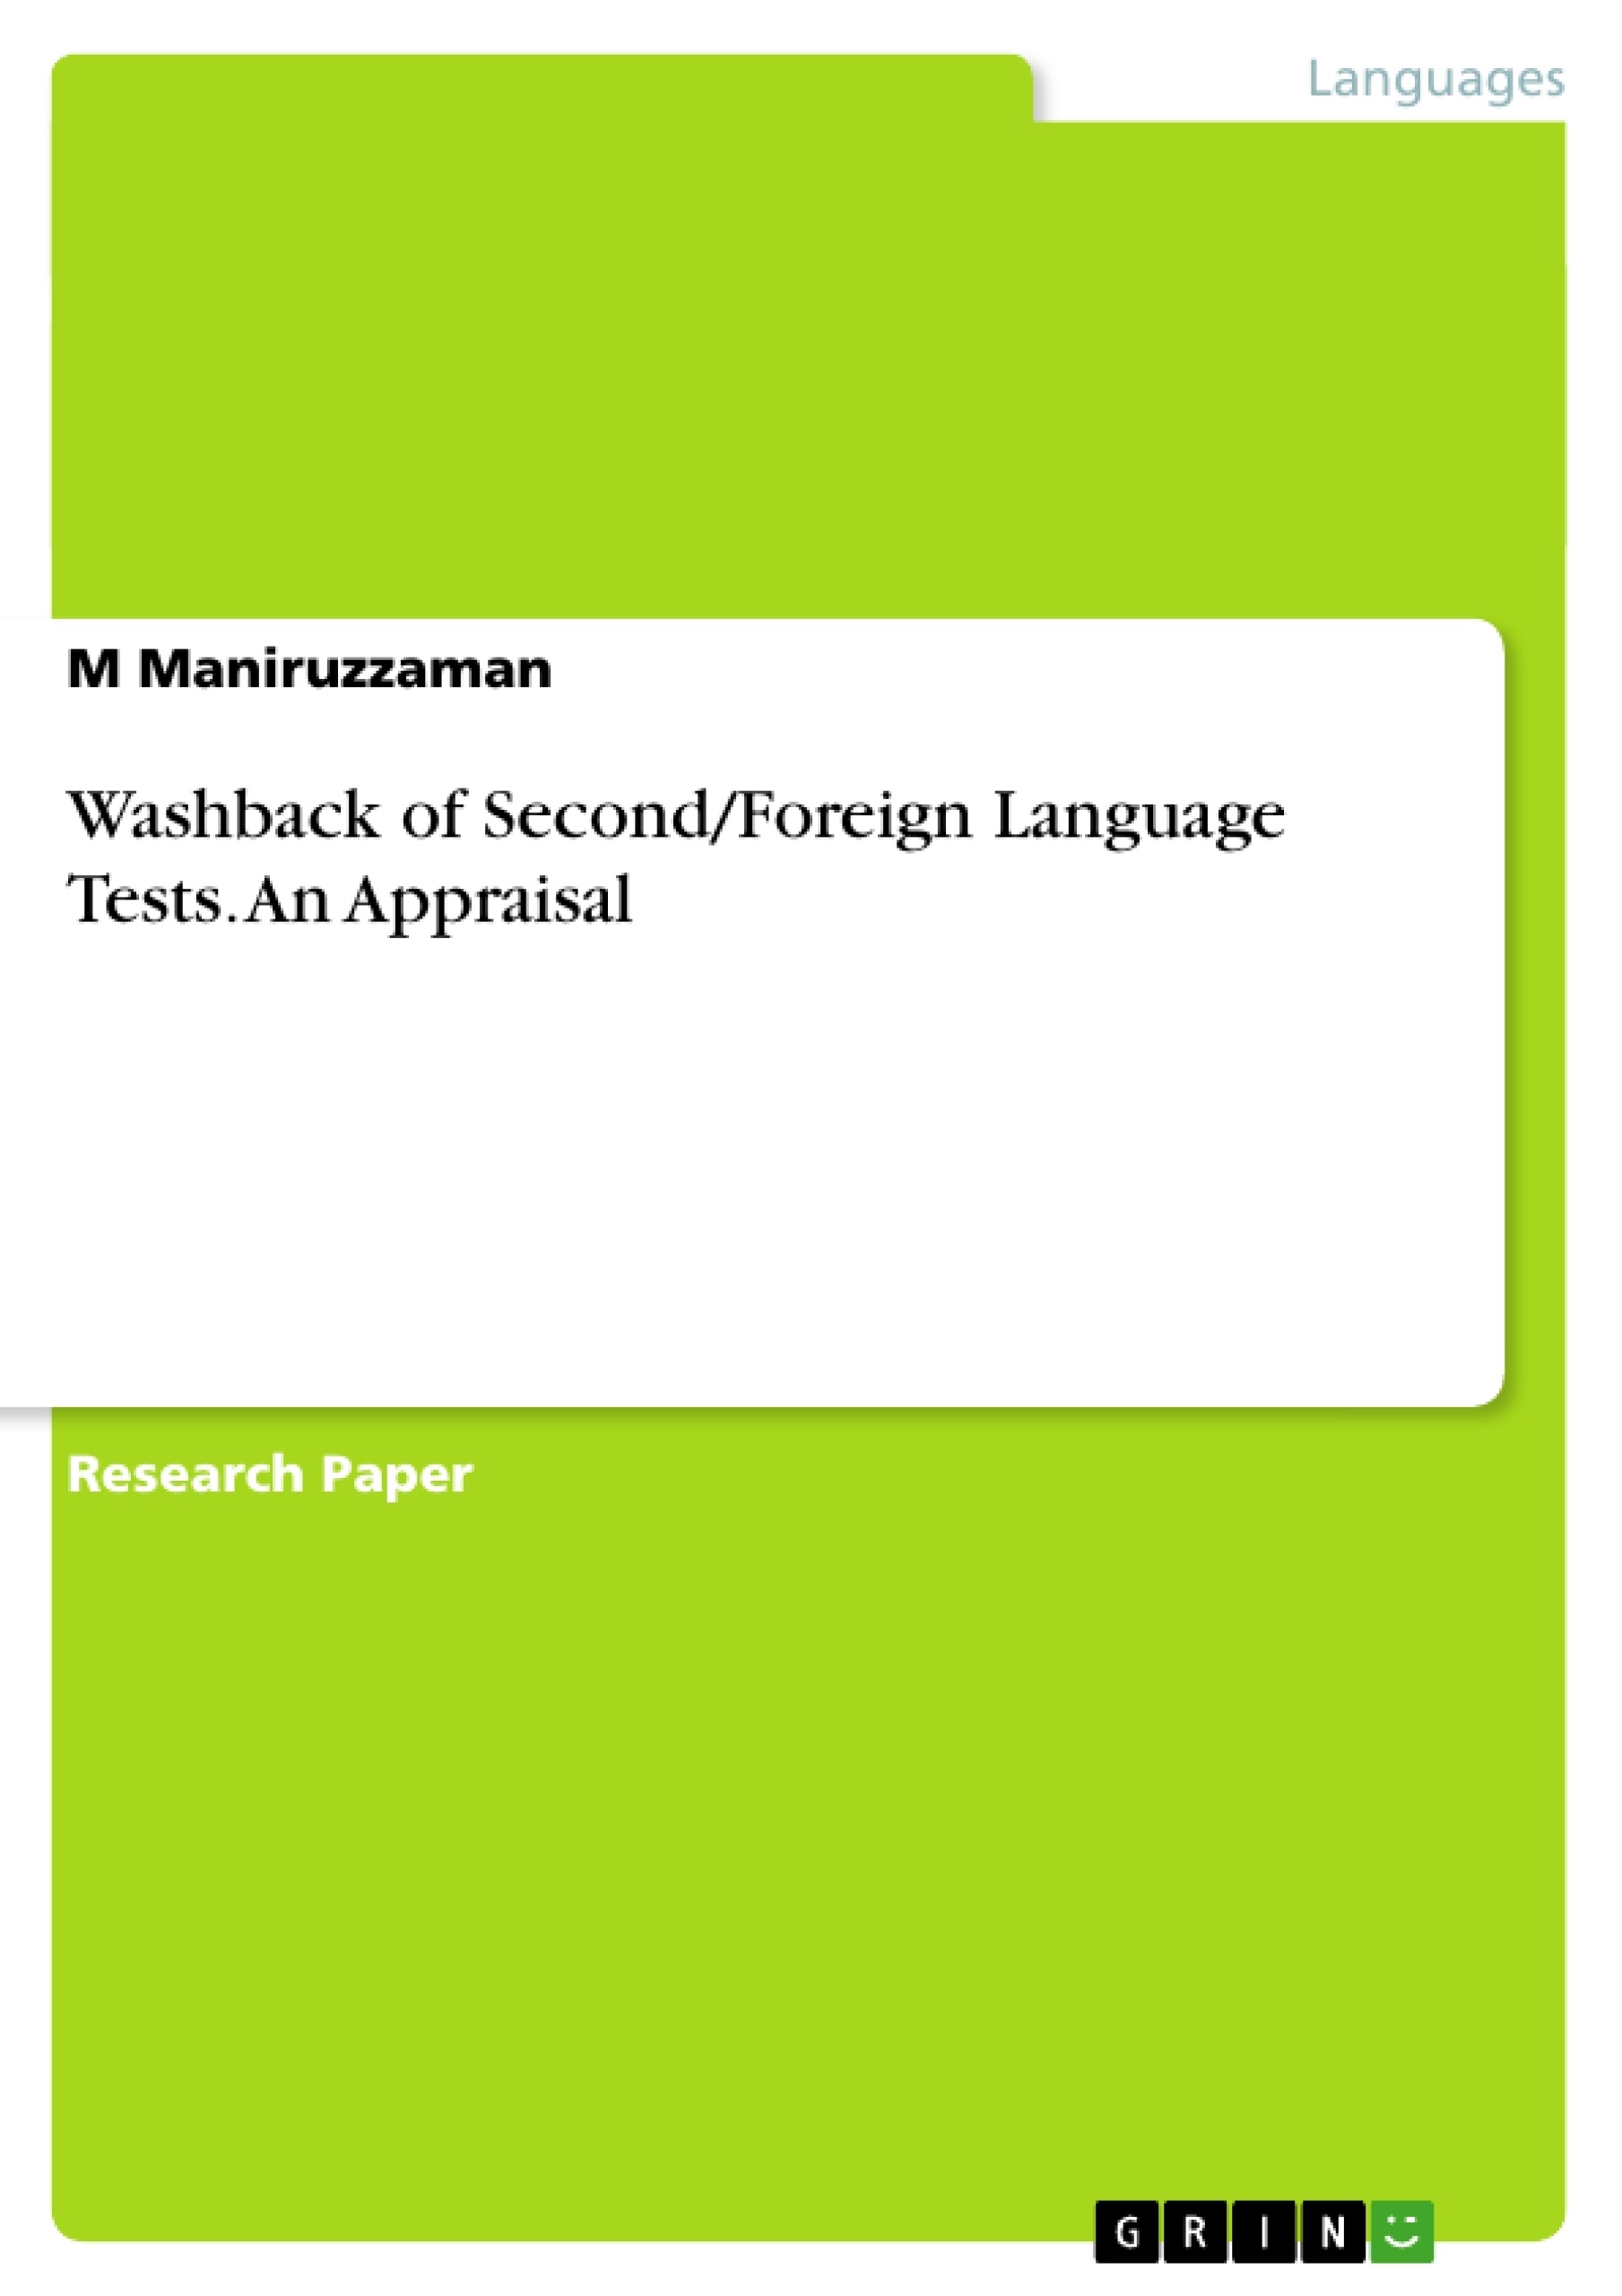 Title: Washback of Second/Foreign Language Tests. An Appraisal